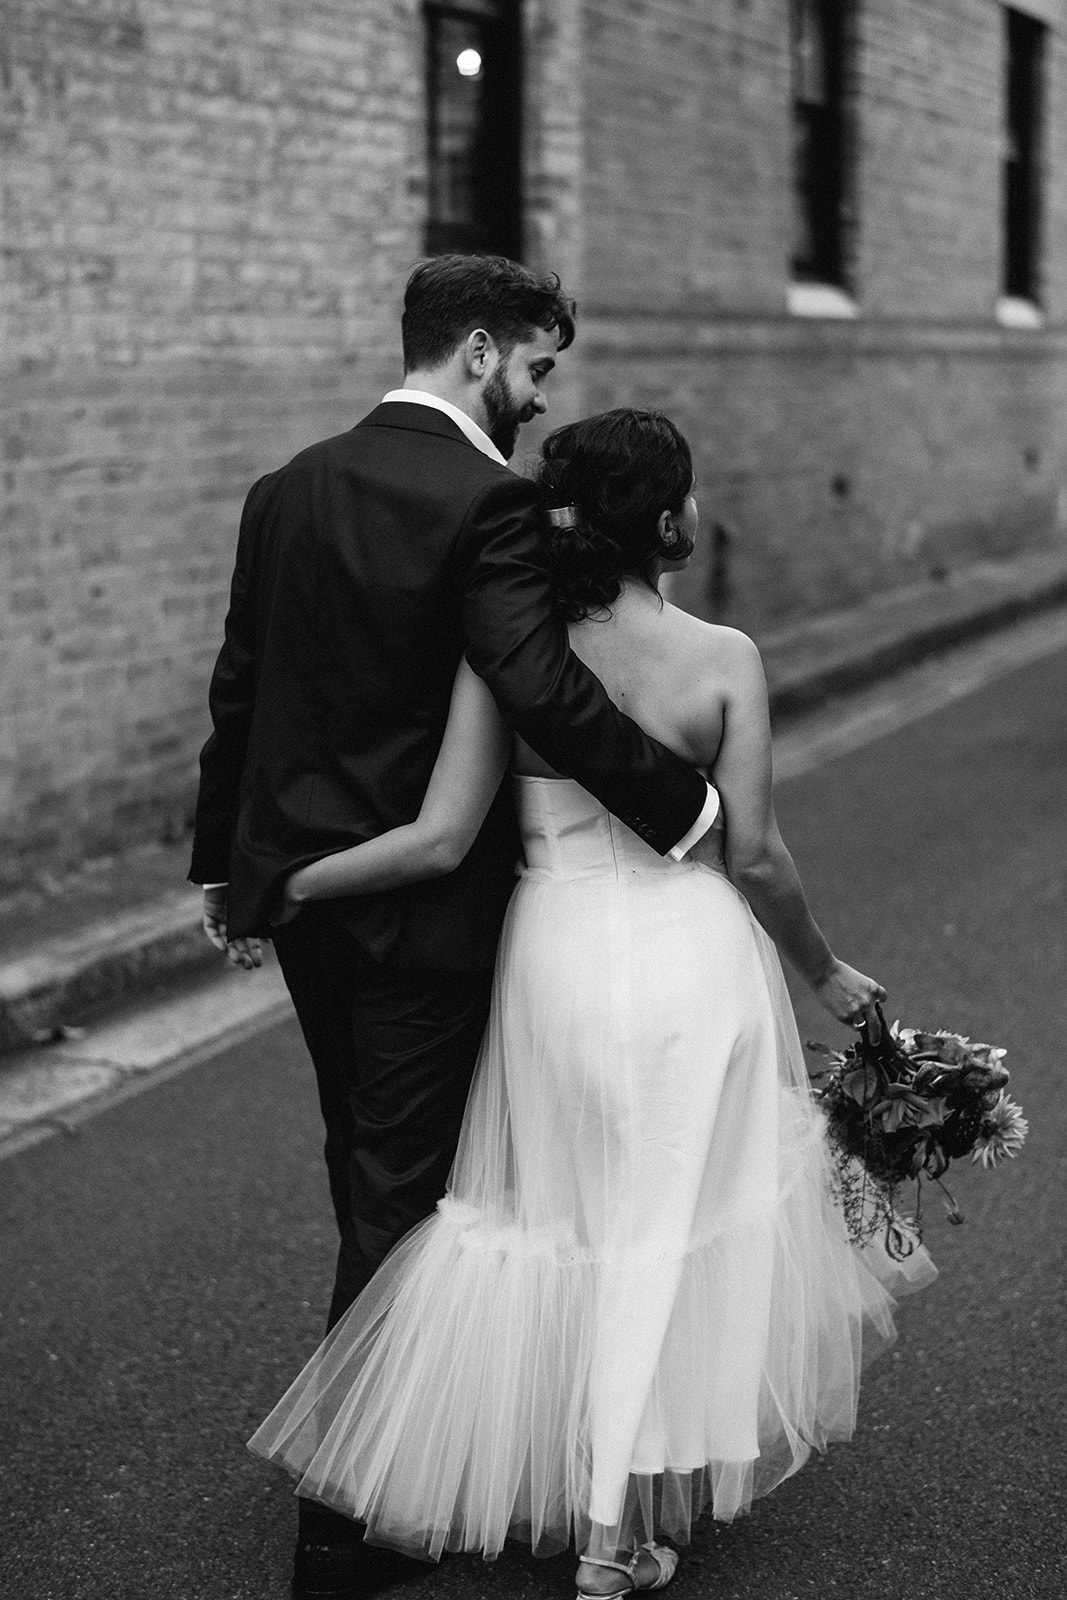 Scott Surplice bride and groom walk with arms around each other